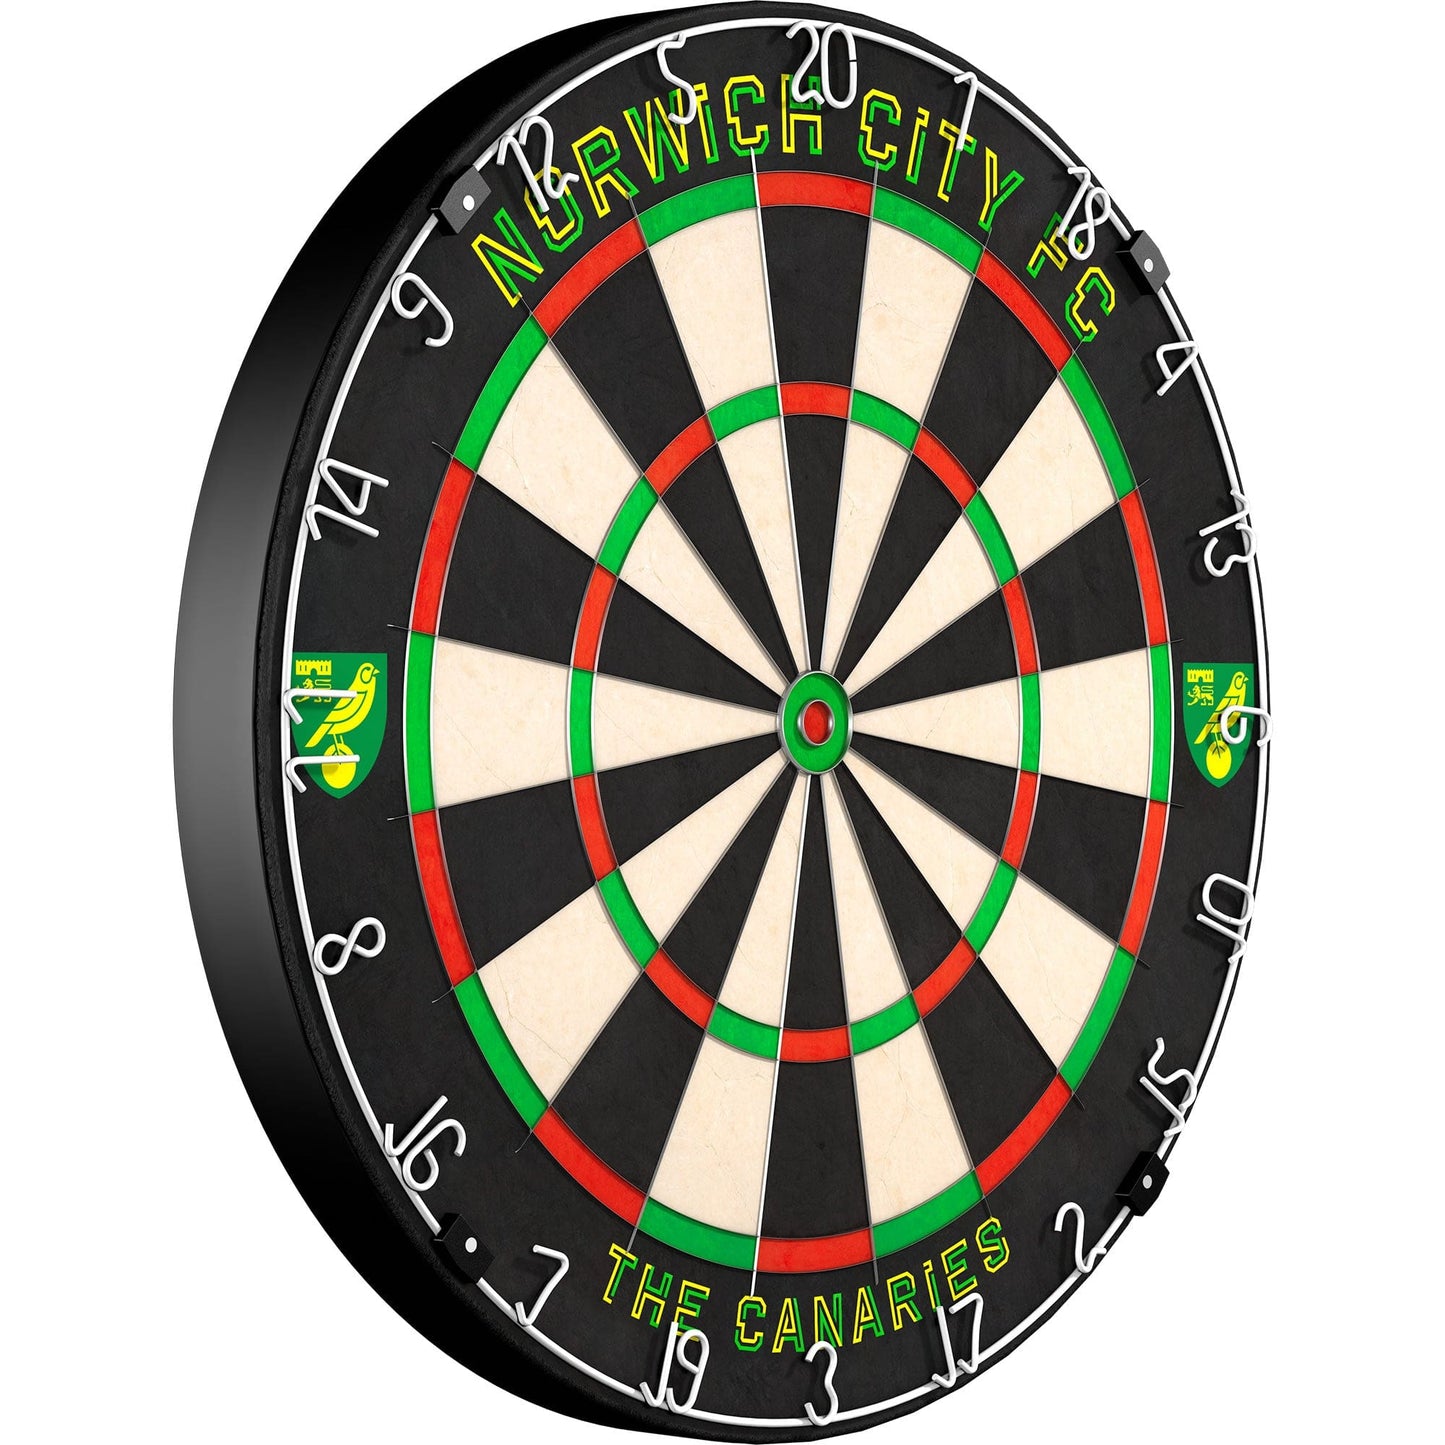 Norwich City FC - Official Licensed - The Canaries - Professional Dartboard - Crest with Name